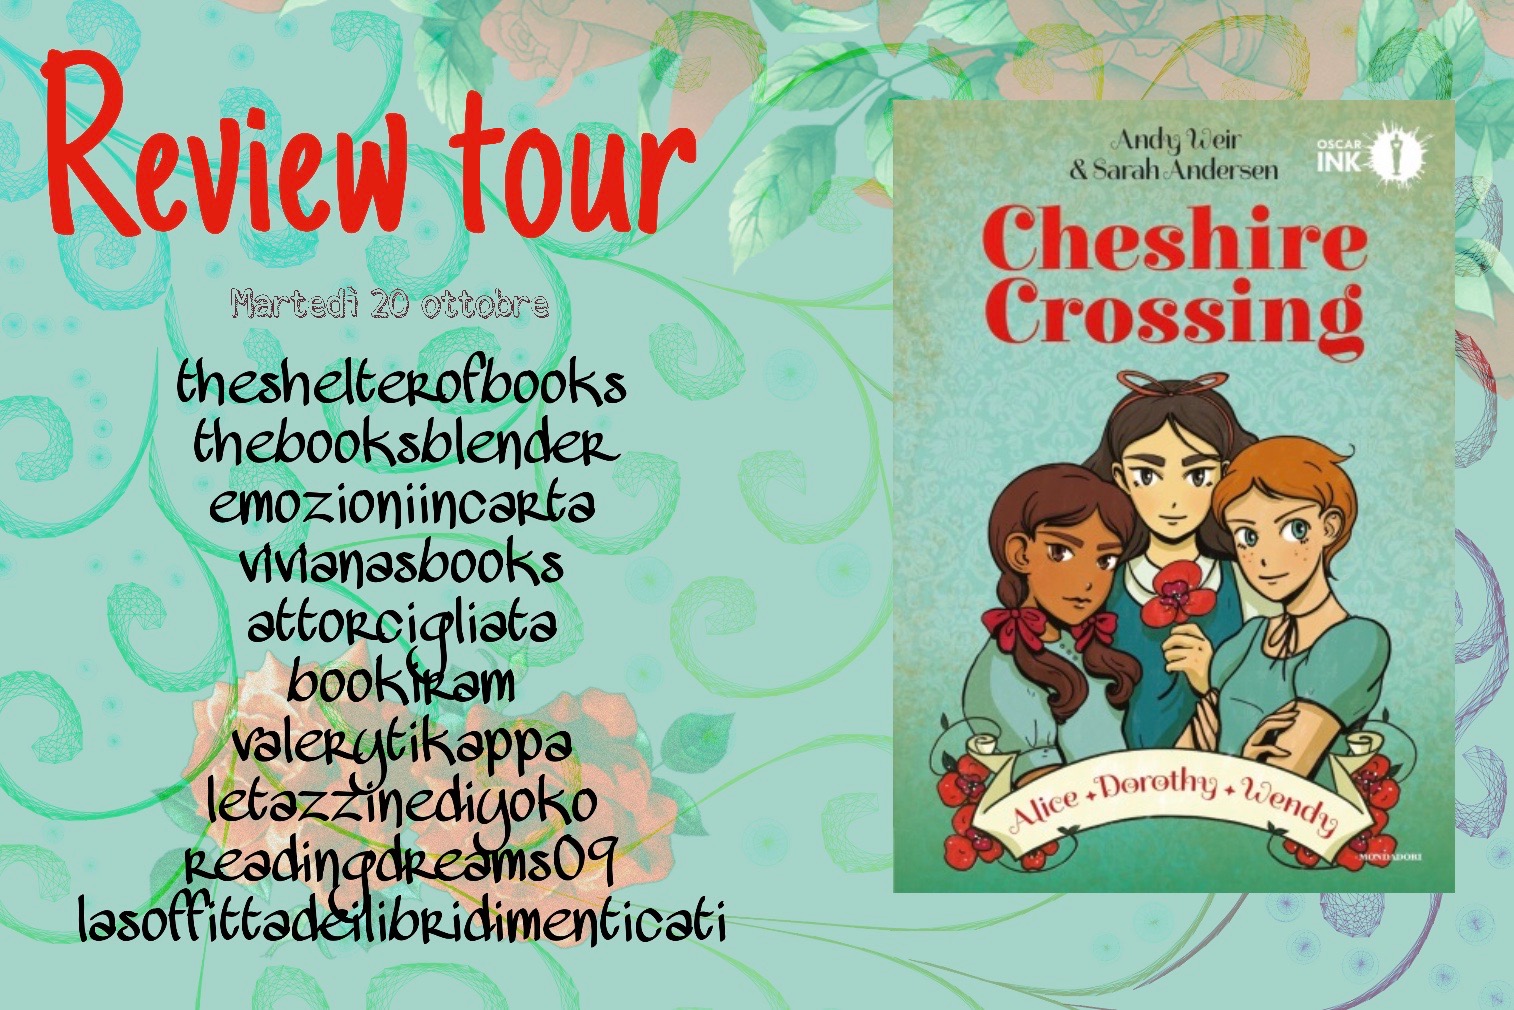 Review Tour: Cheshire Crossing